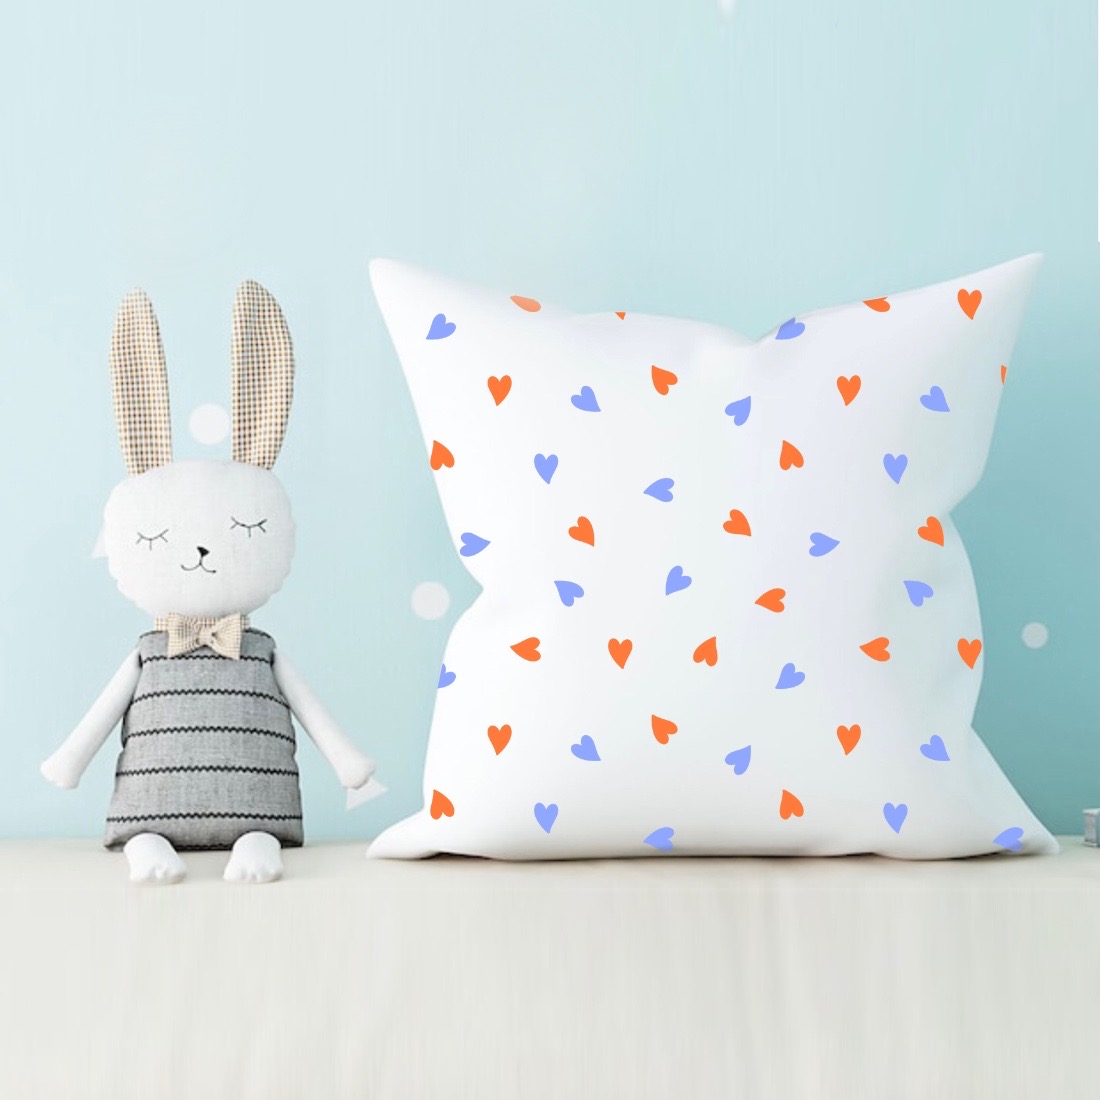 Cute Pillow Chickens and Hearts Poster Seamless Pattern Preview image.